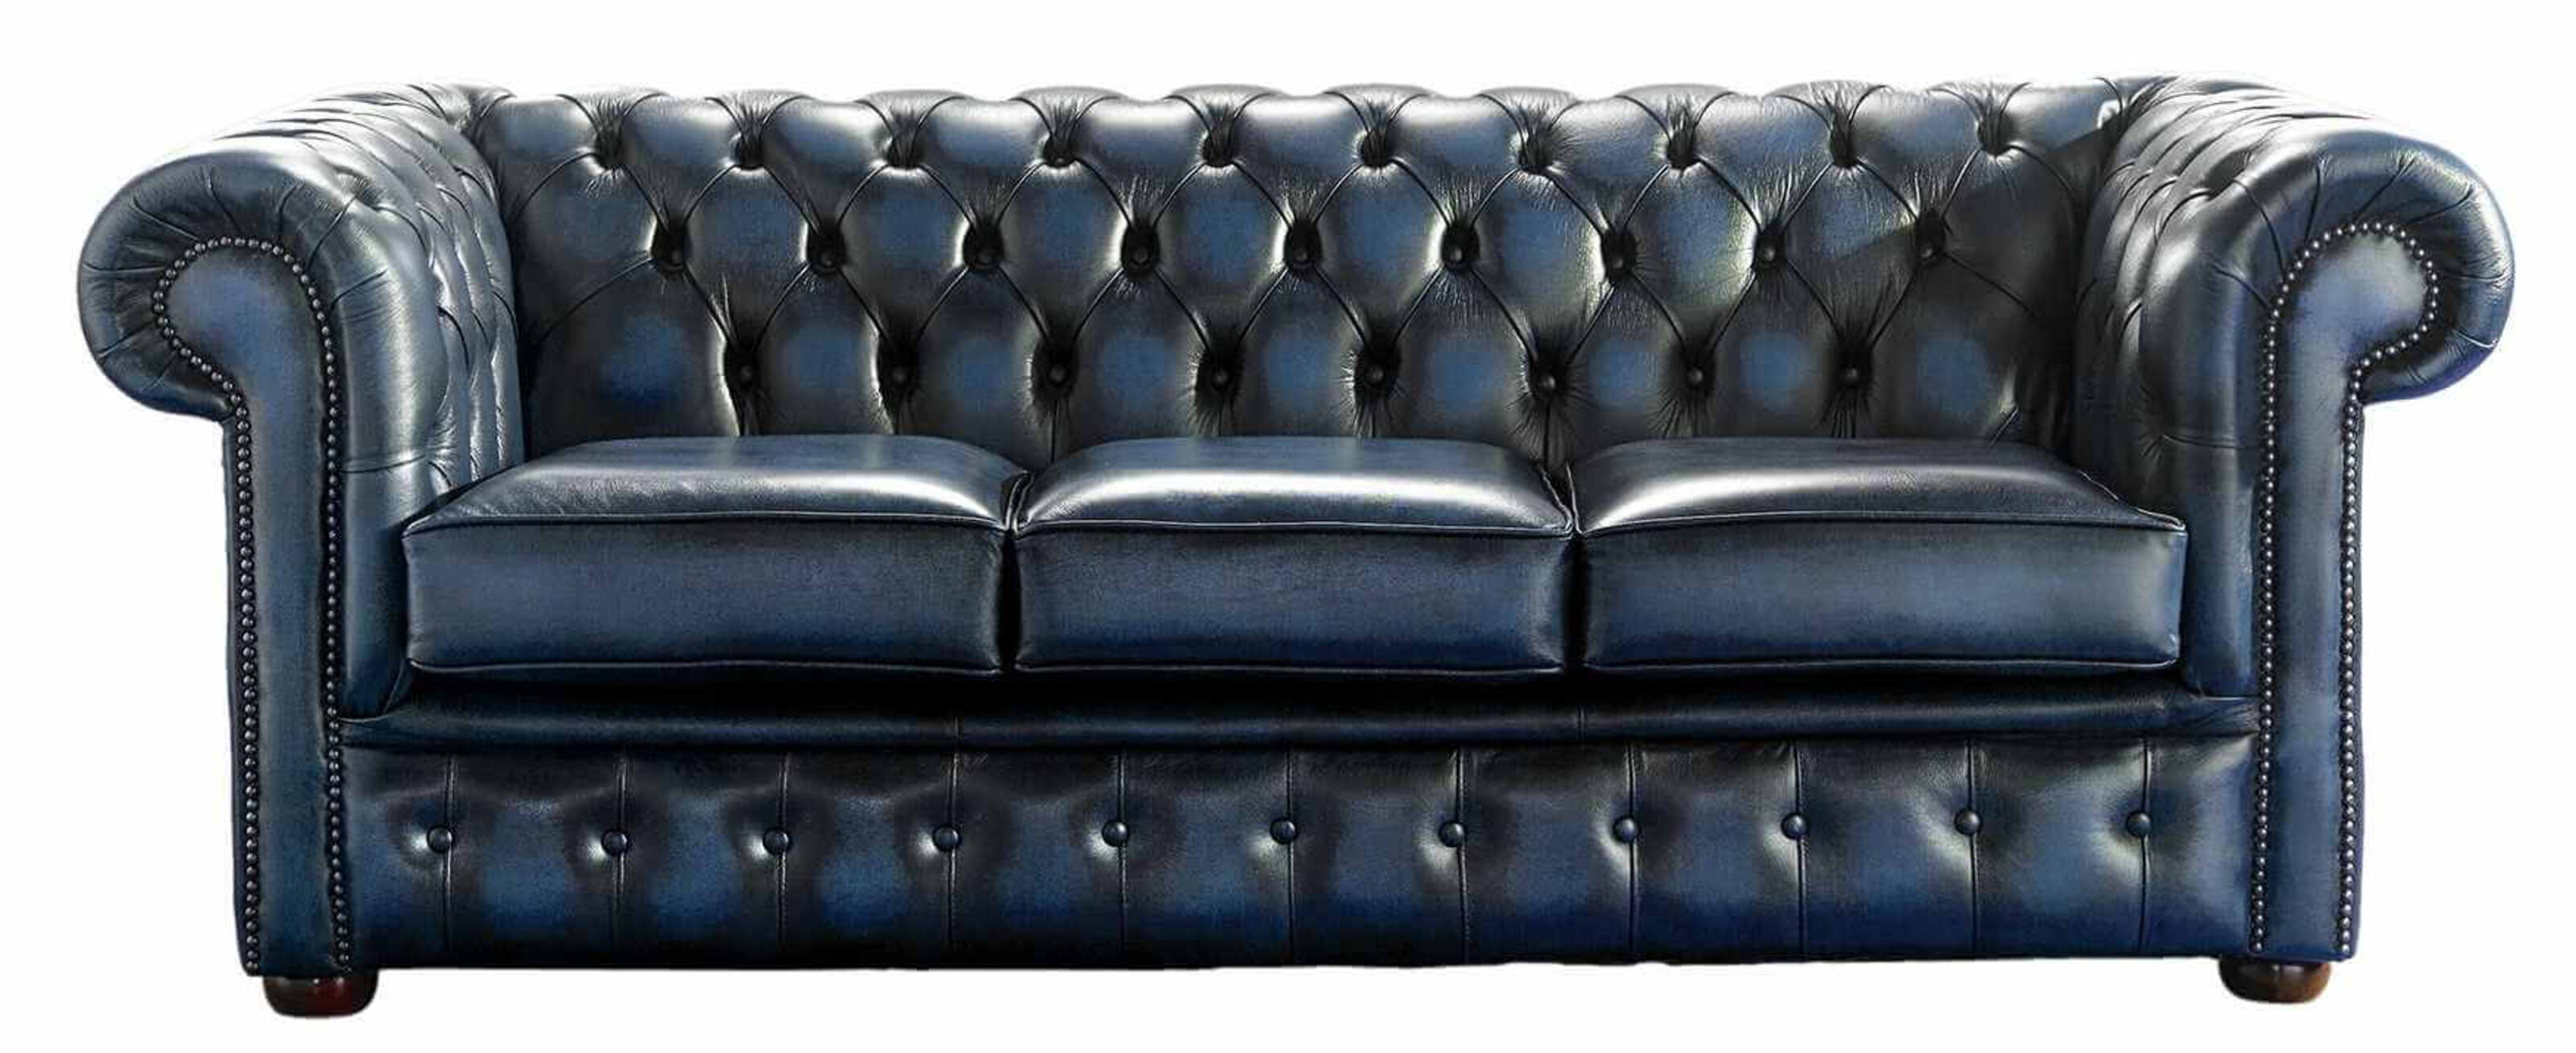 Discover the Charm of the Chesterfield Queen Anne Armchair  %Post Title